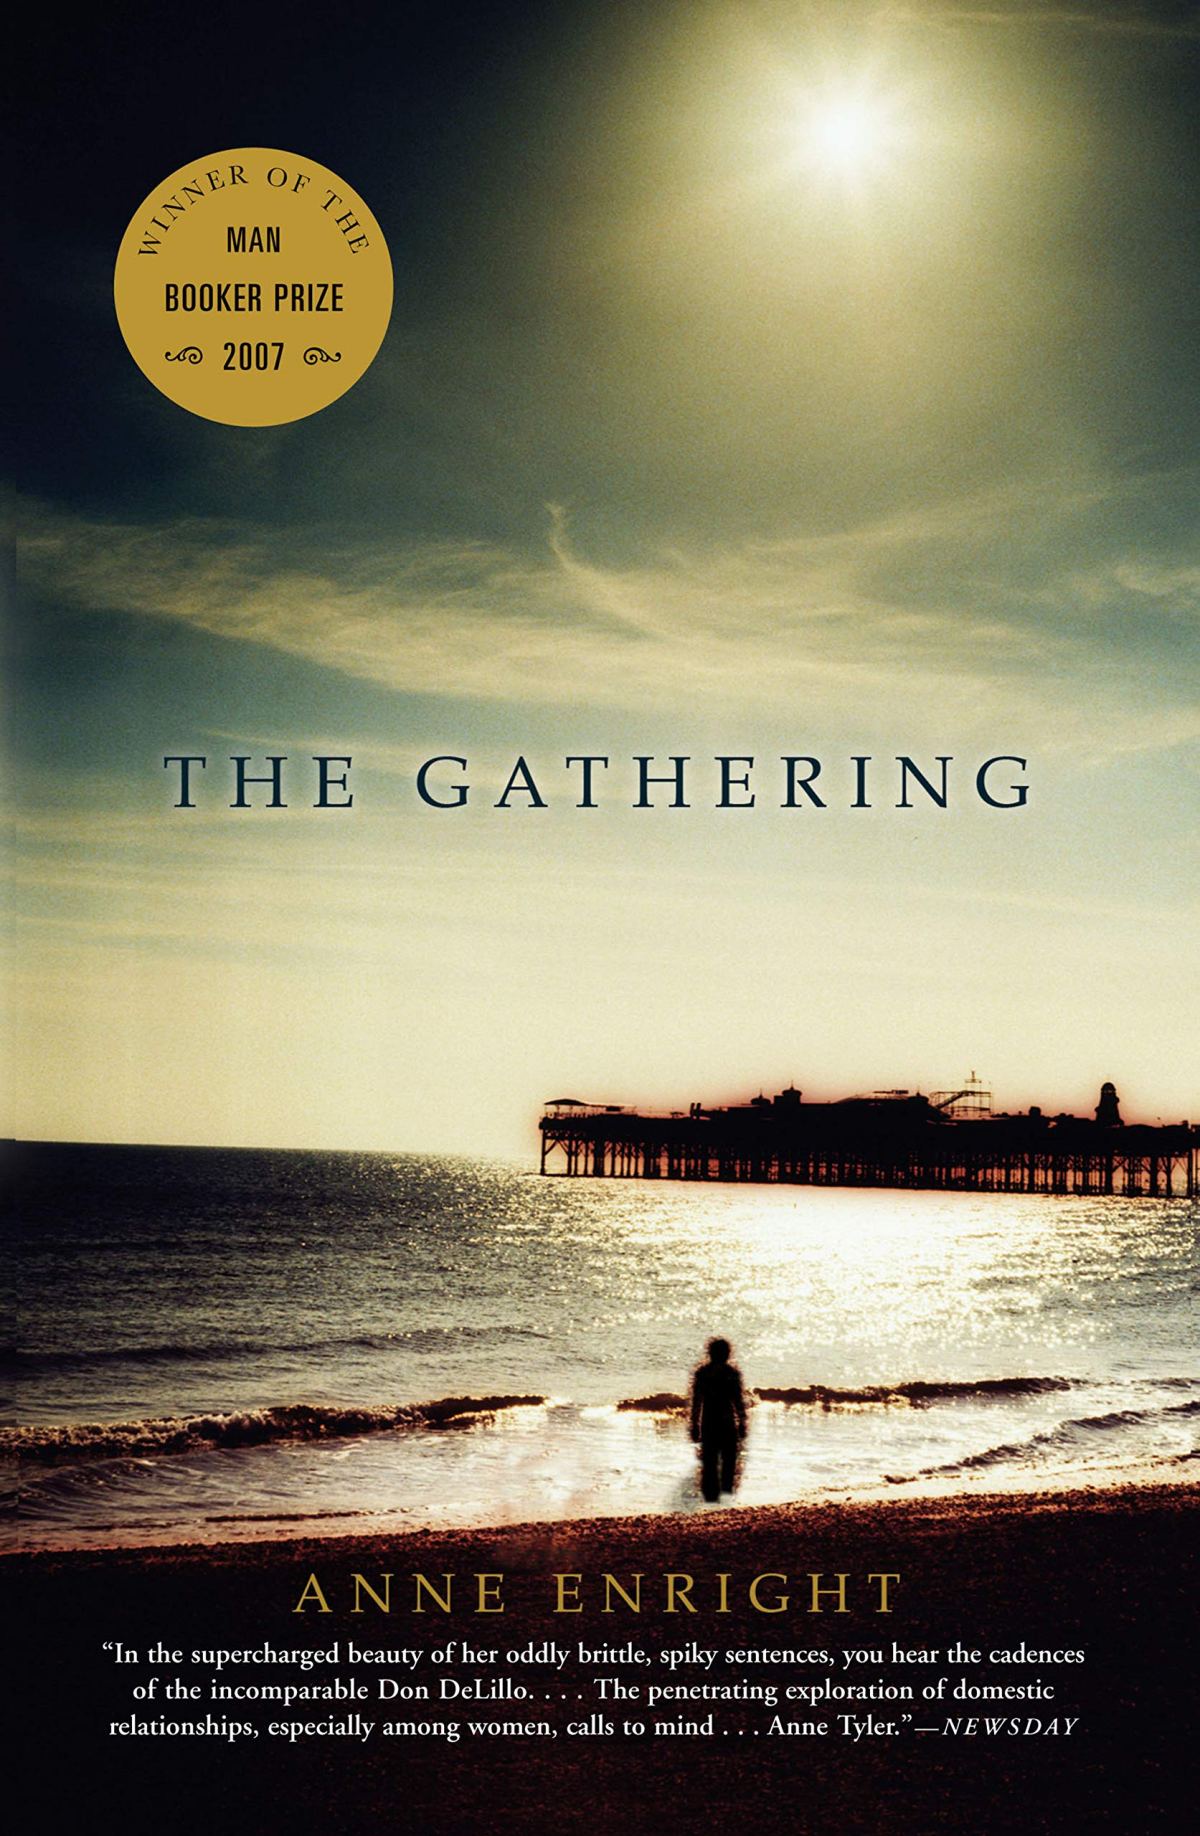 Book 156 – The Gathering by Anne Enright